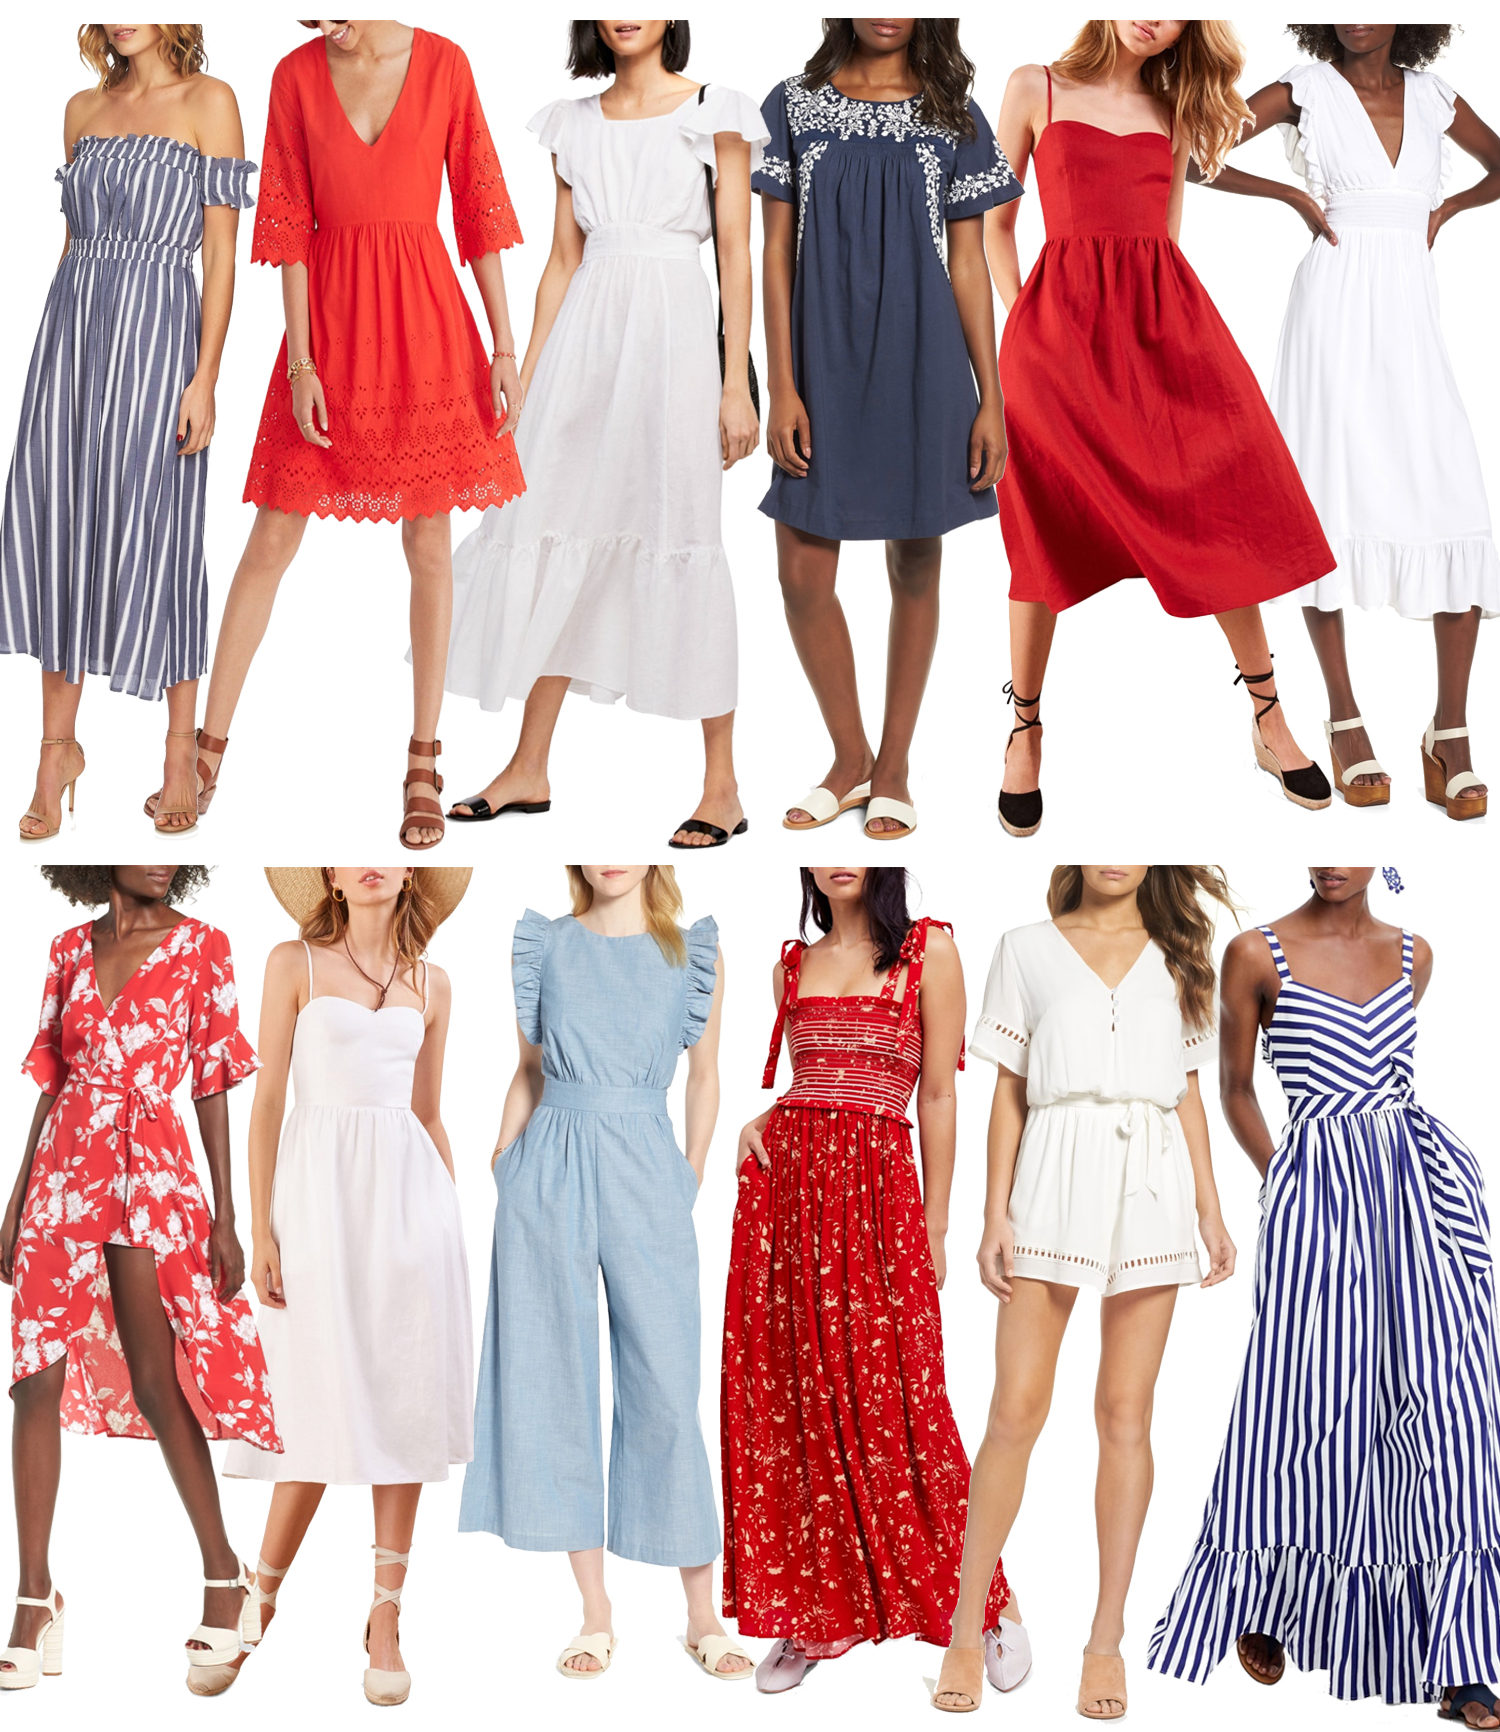 4th-of-july-outfit-ideas-4th-of-july-dresses-red-dress-blue-dress-nordstrom-dresses